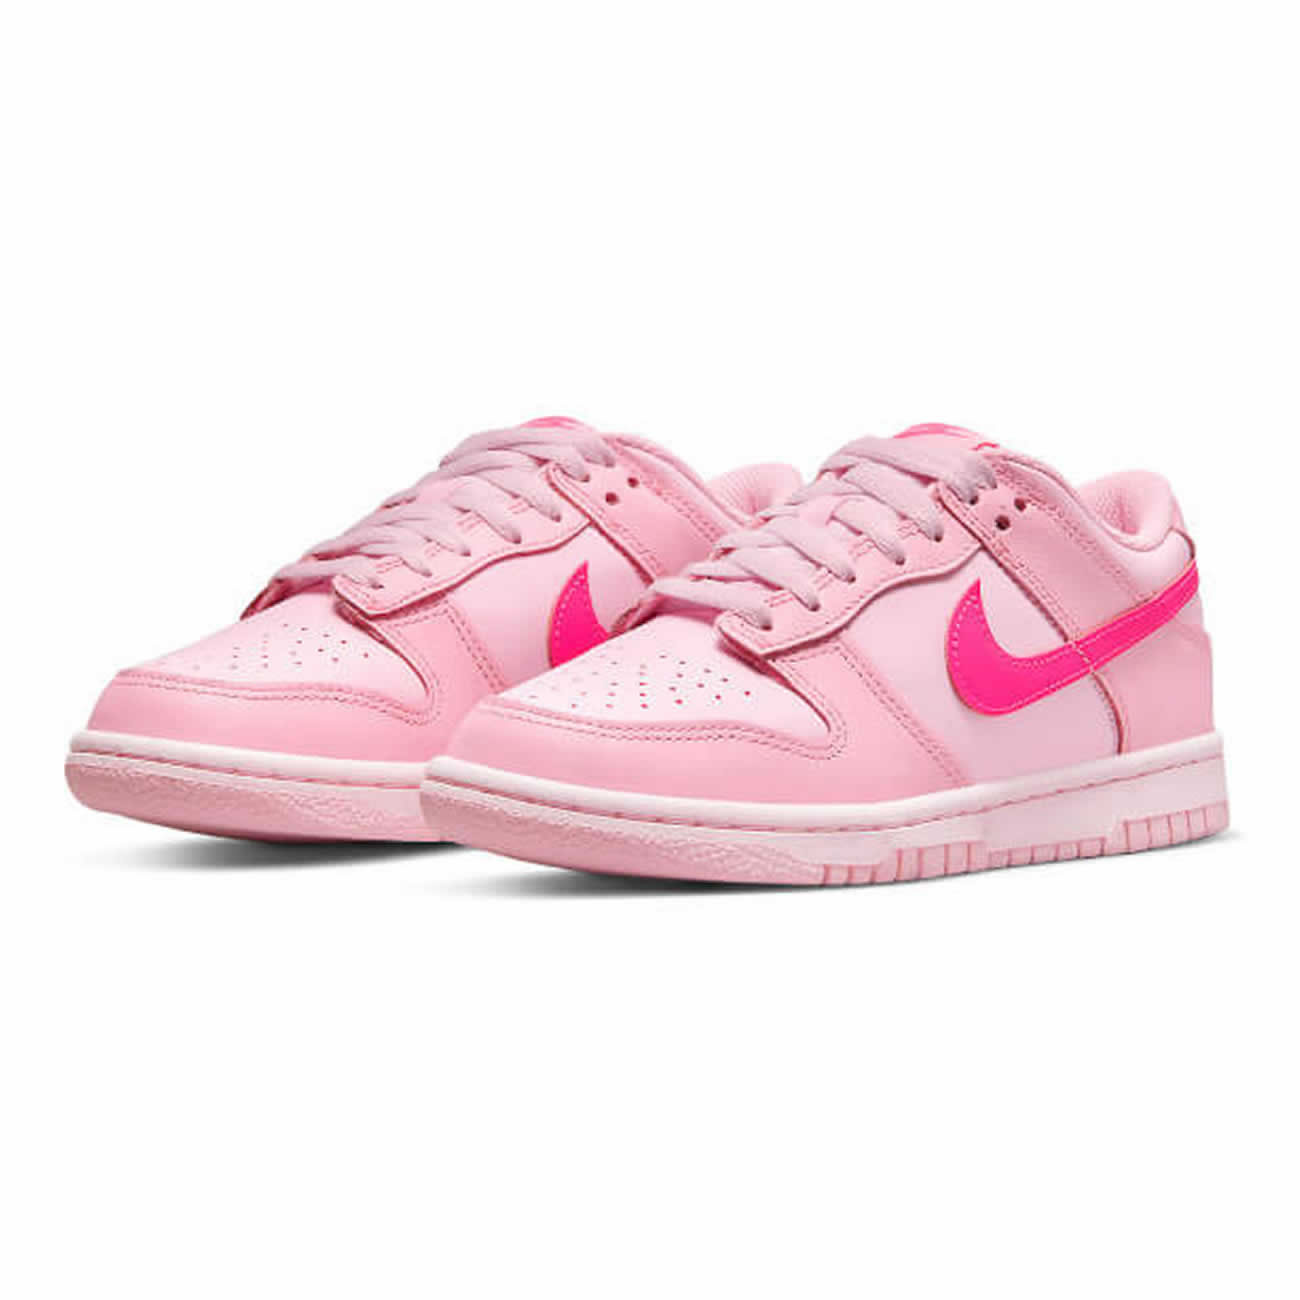 Nike Dunk Low Triple Pink Gs Dh9765 600 (0) - newkick.org